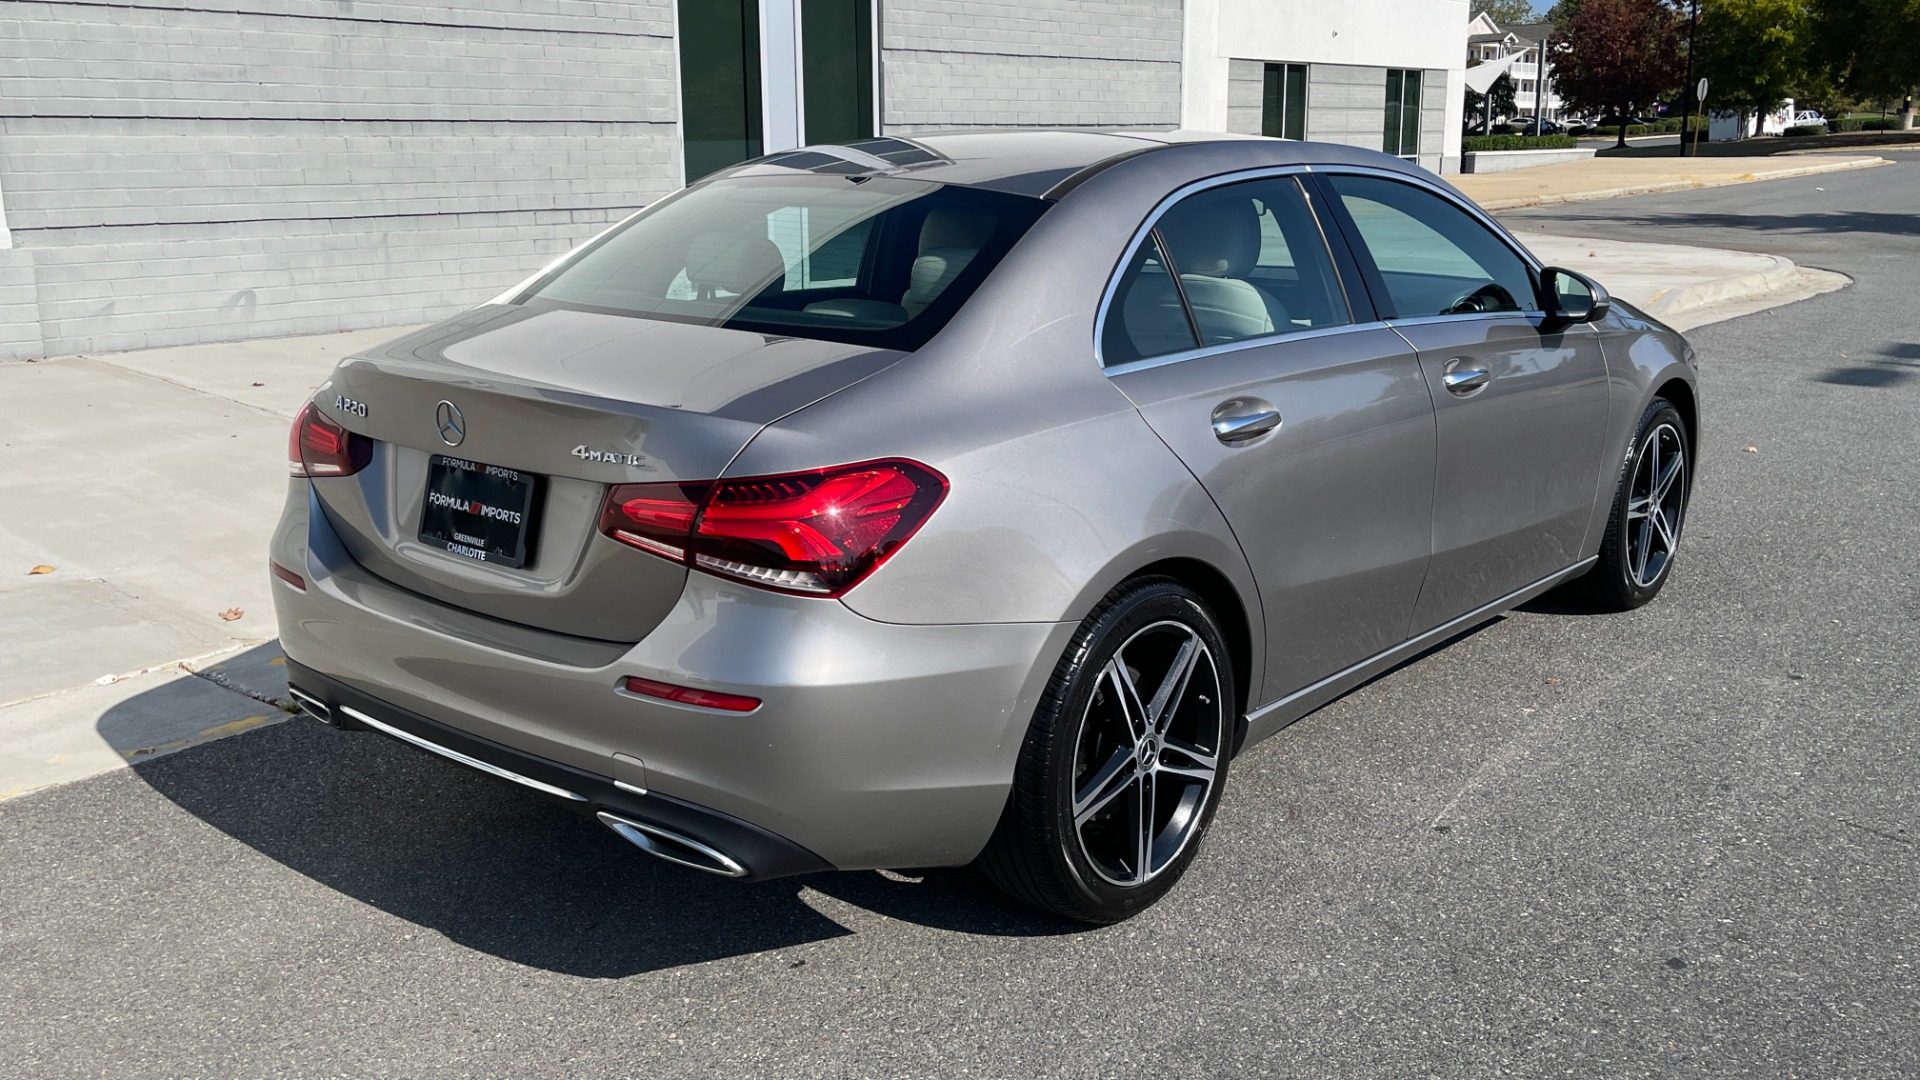 Used 2019 Mercedes-Benz A-Class A220 / PREMIUM / AMBIENT LIGHTING / BLIND SPOT / WIRELESS CHARGING for sale $30,599 at Formula Imports in Charlotte NC 28227 4